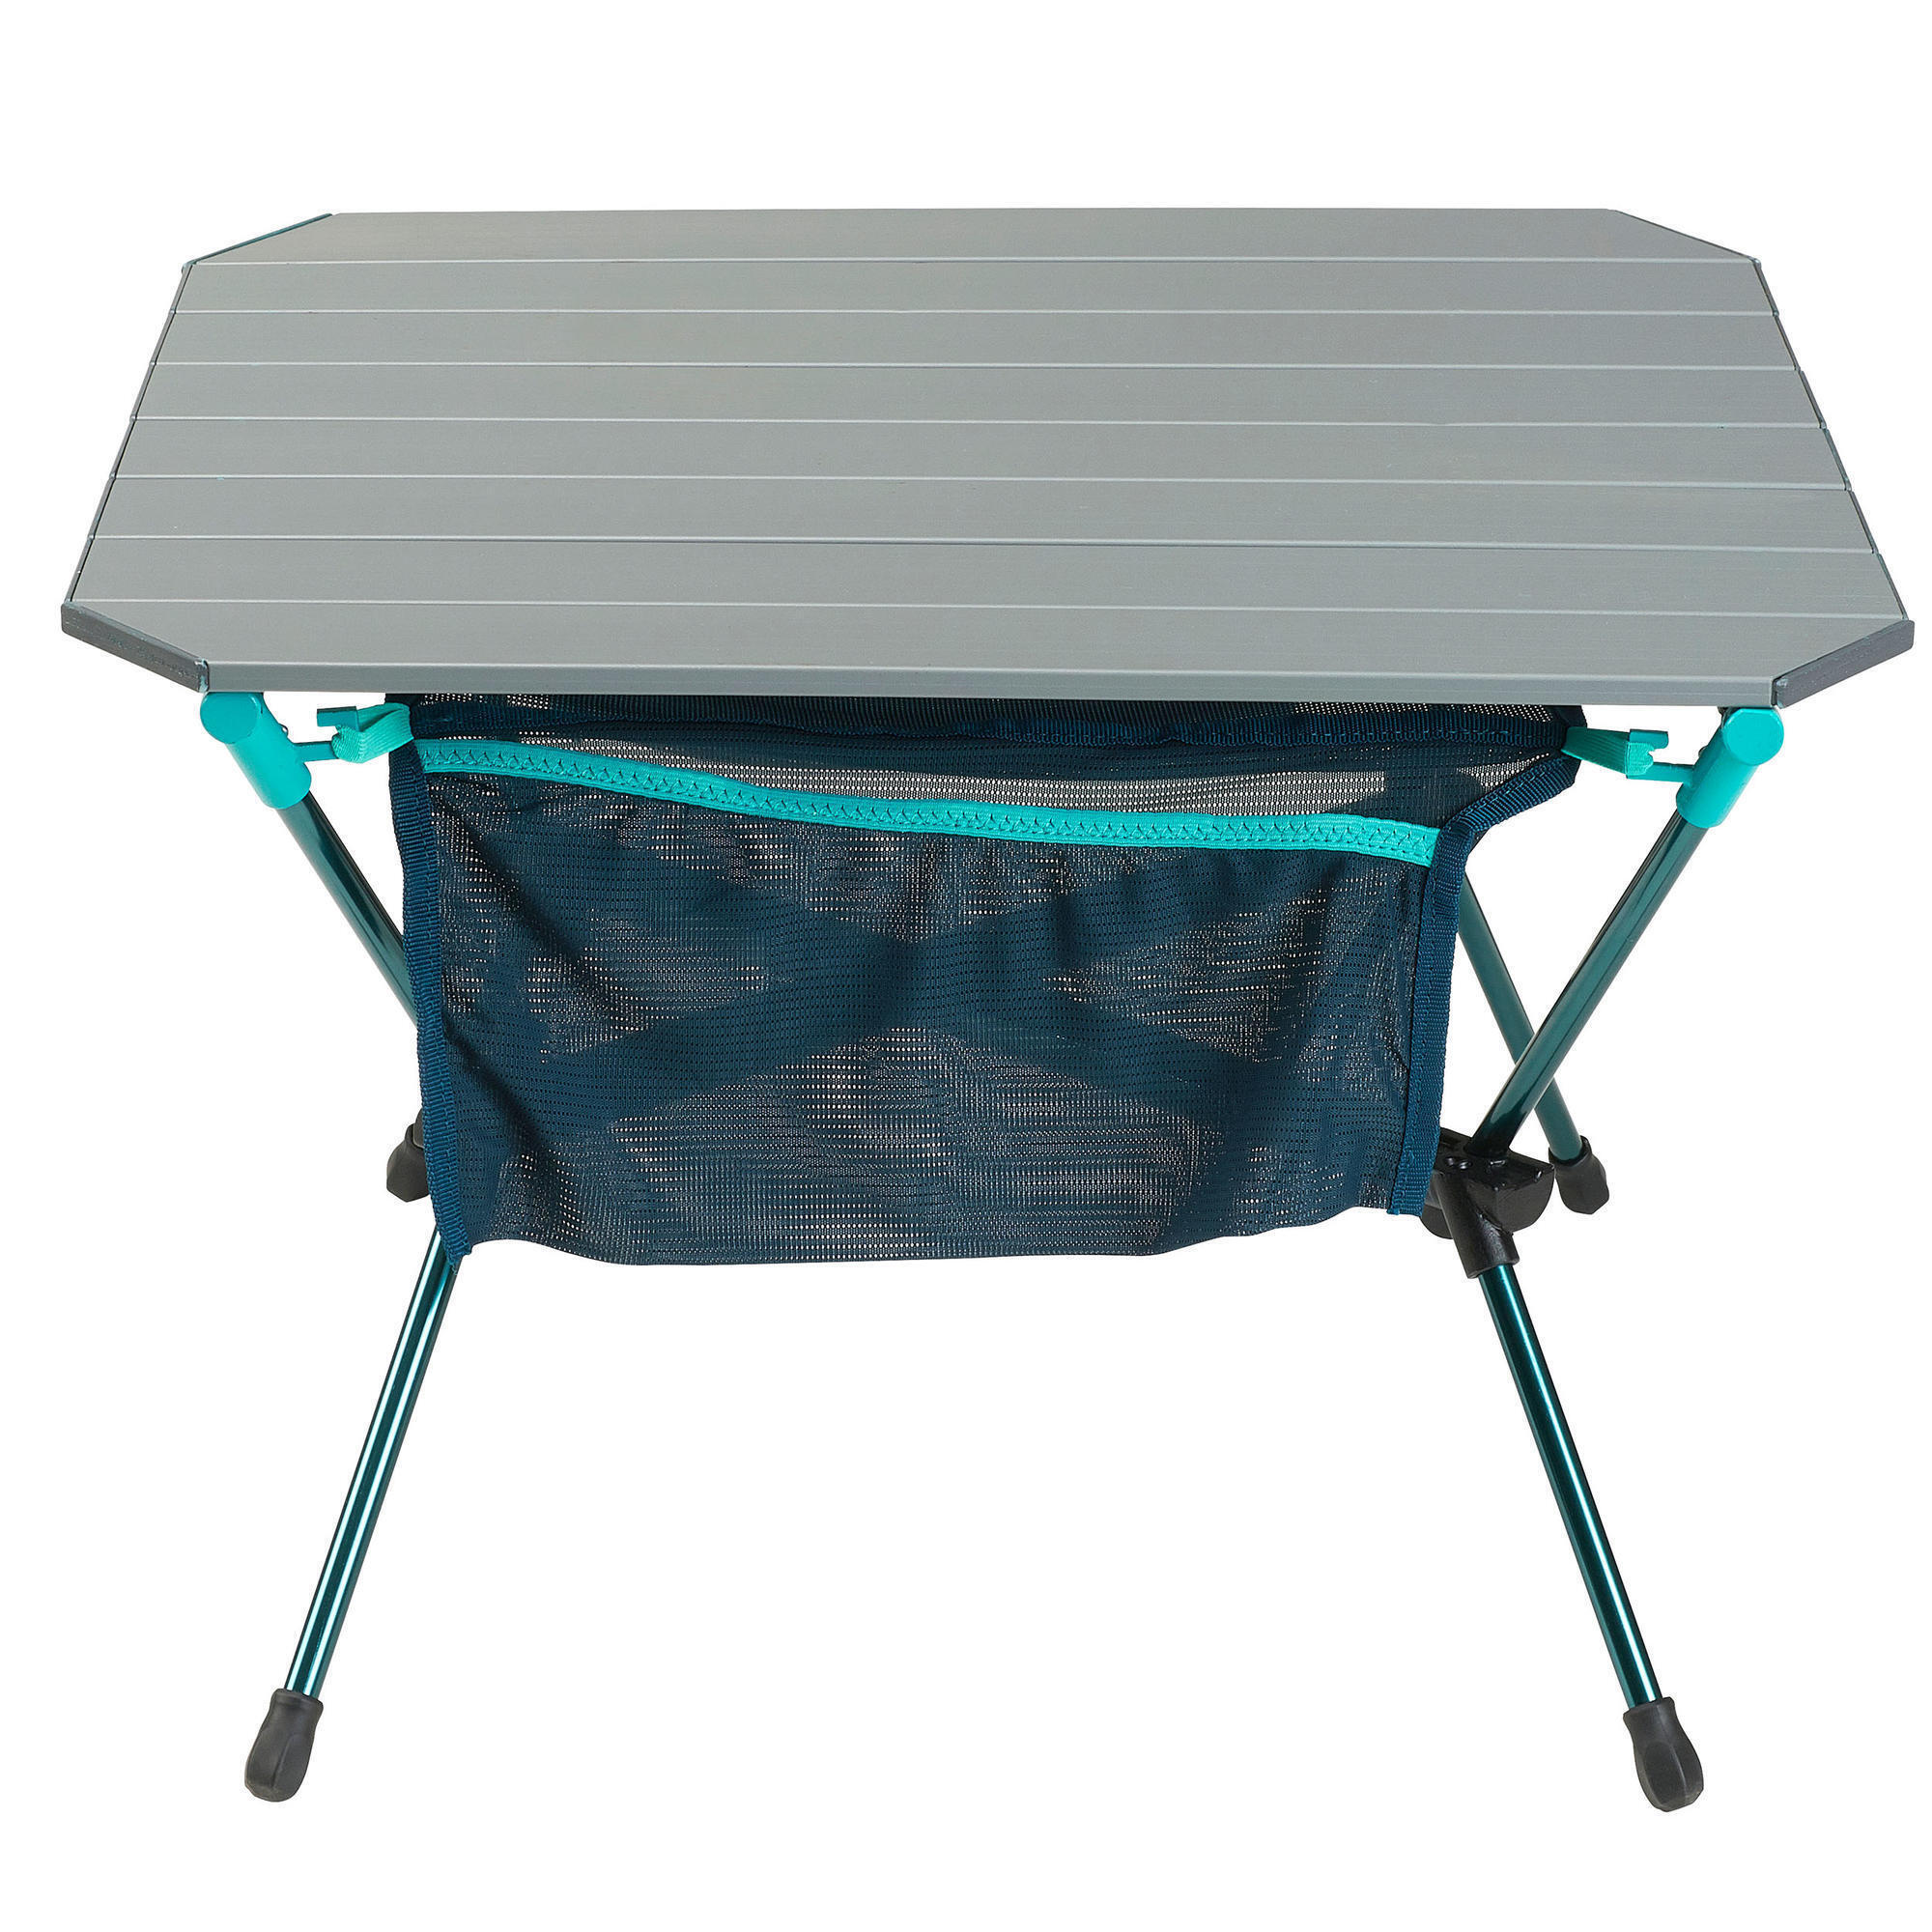 FOLDING CAMPING TABLE - MH500 10/10